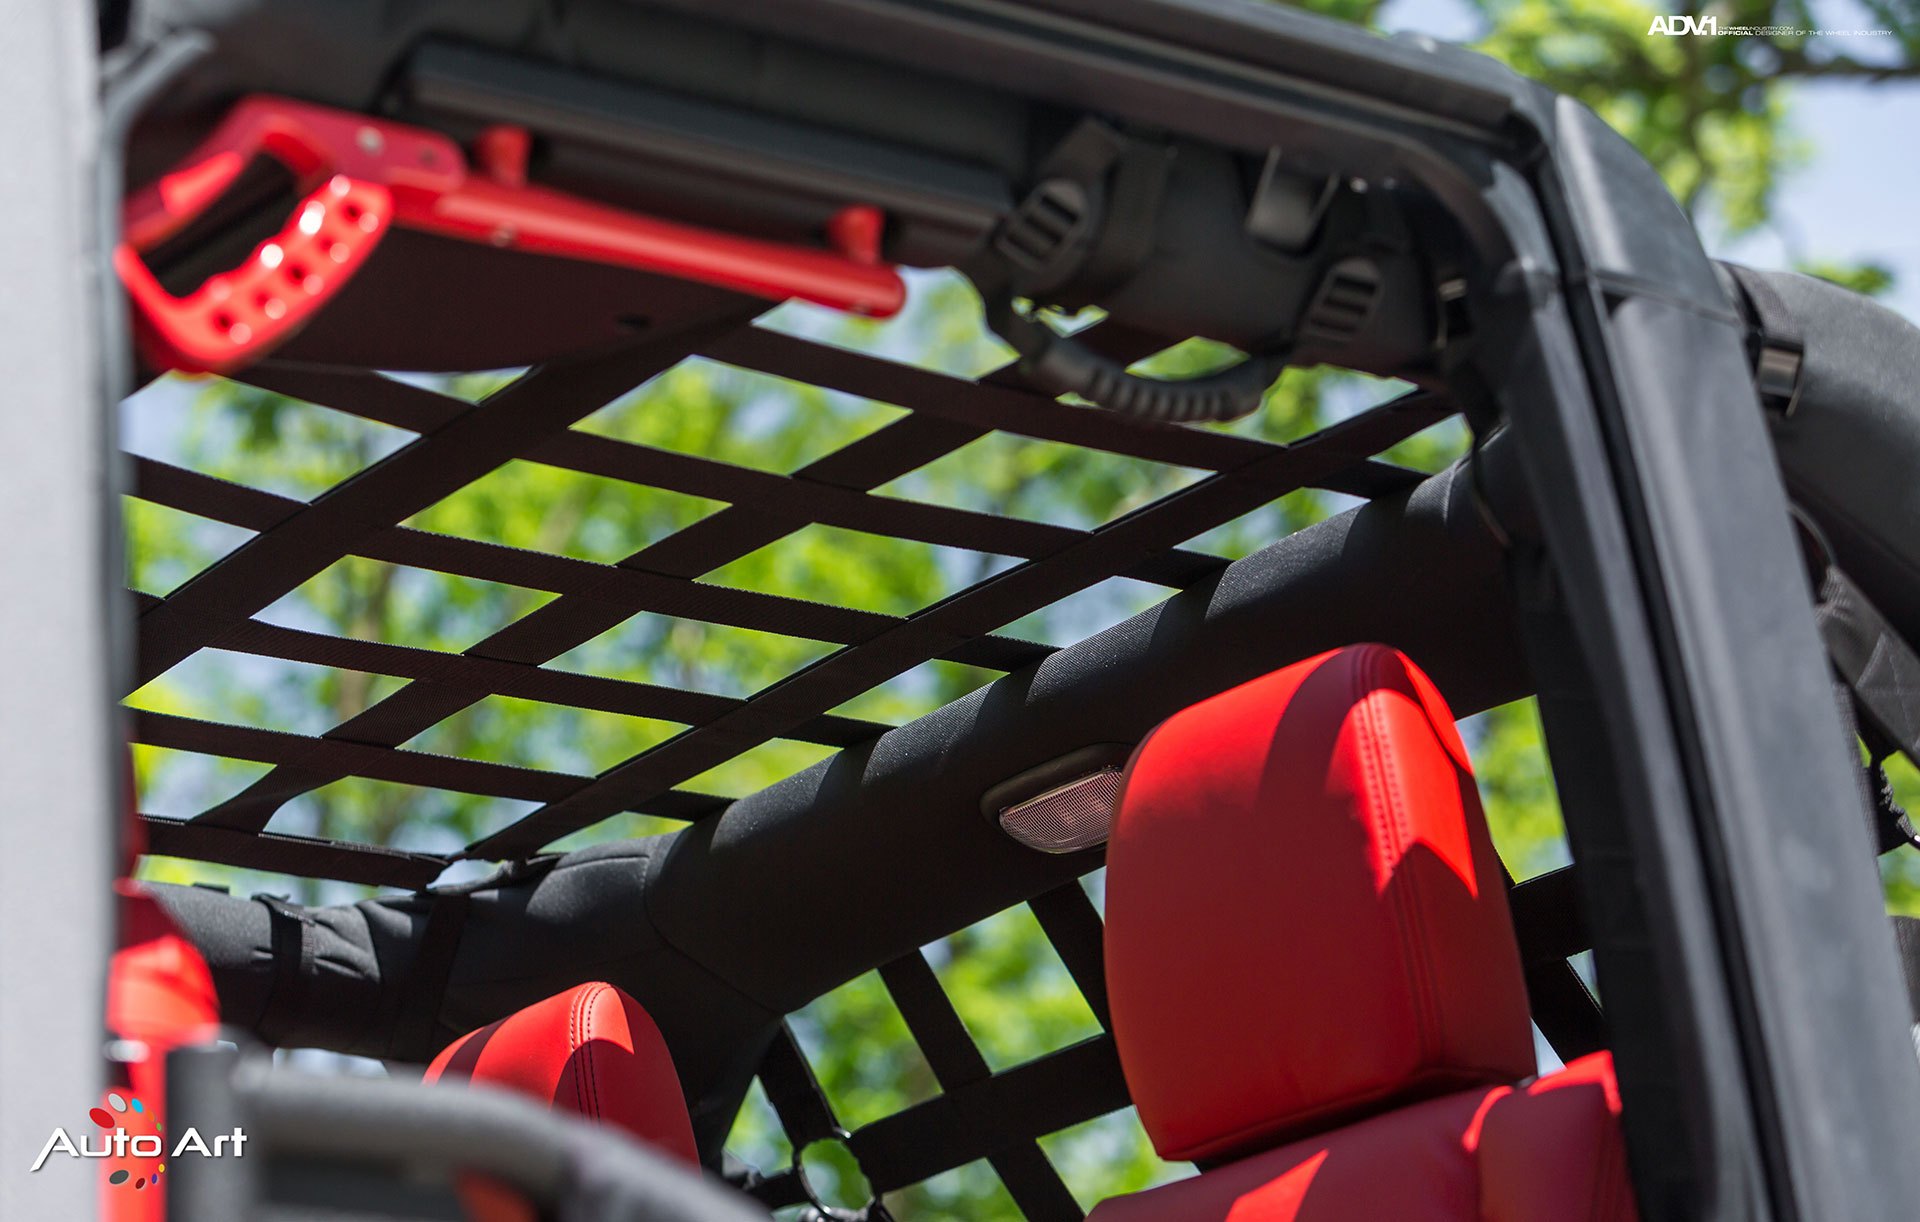 Aftermarket Roof on Gray Jeep Wrangler - Photo by ADV.1